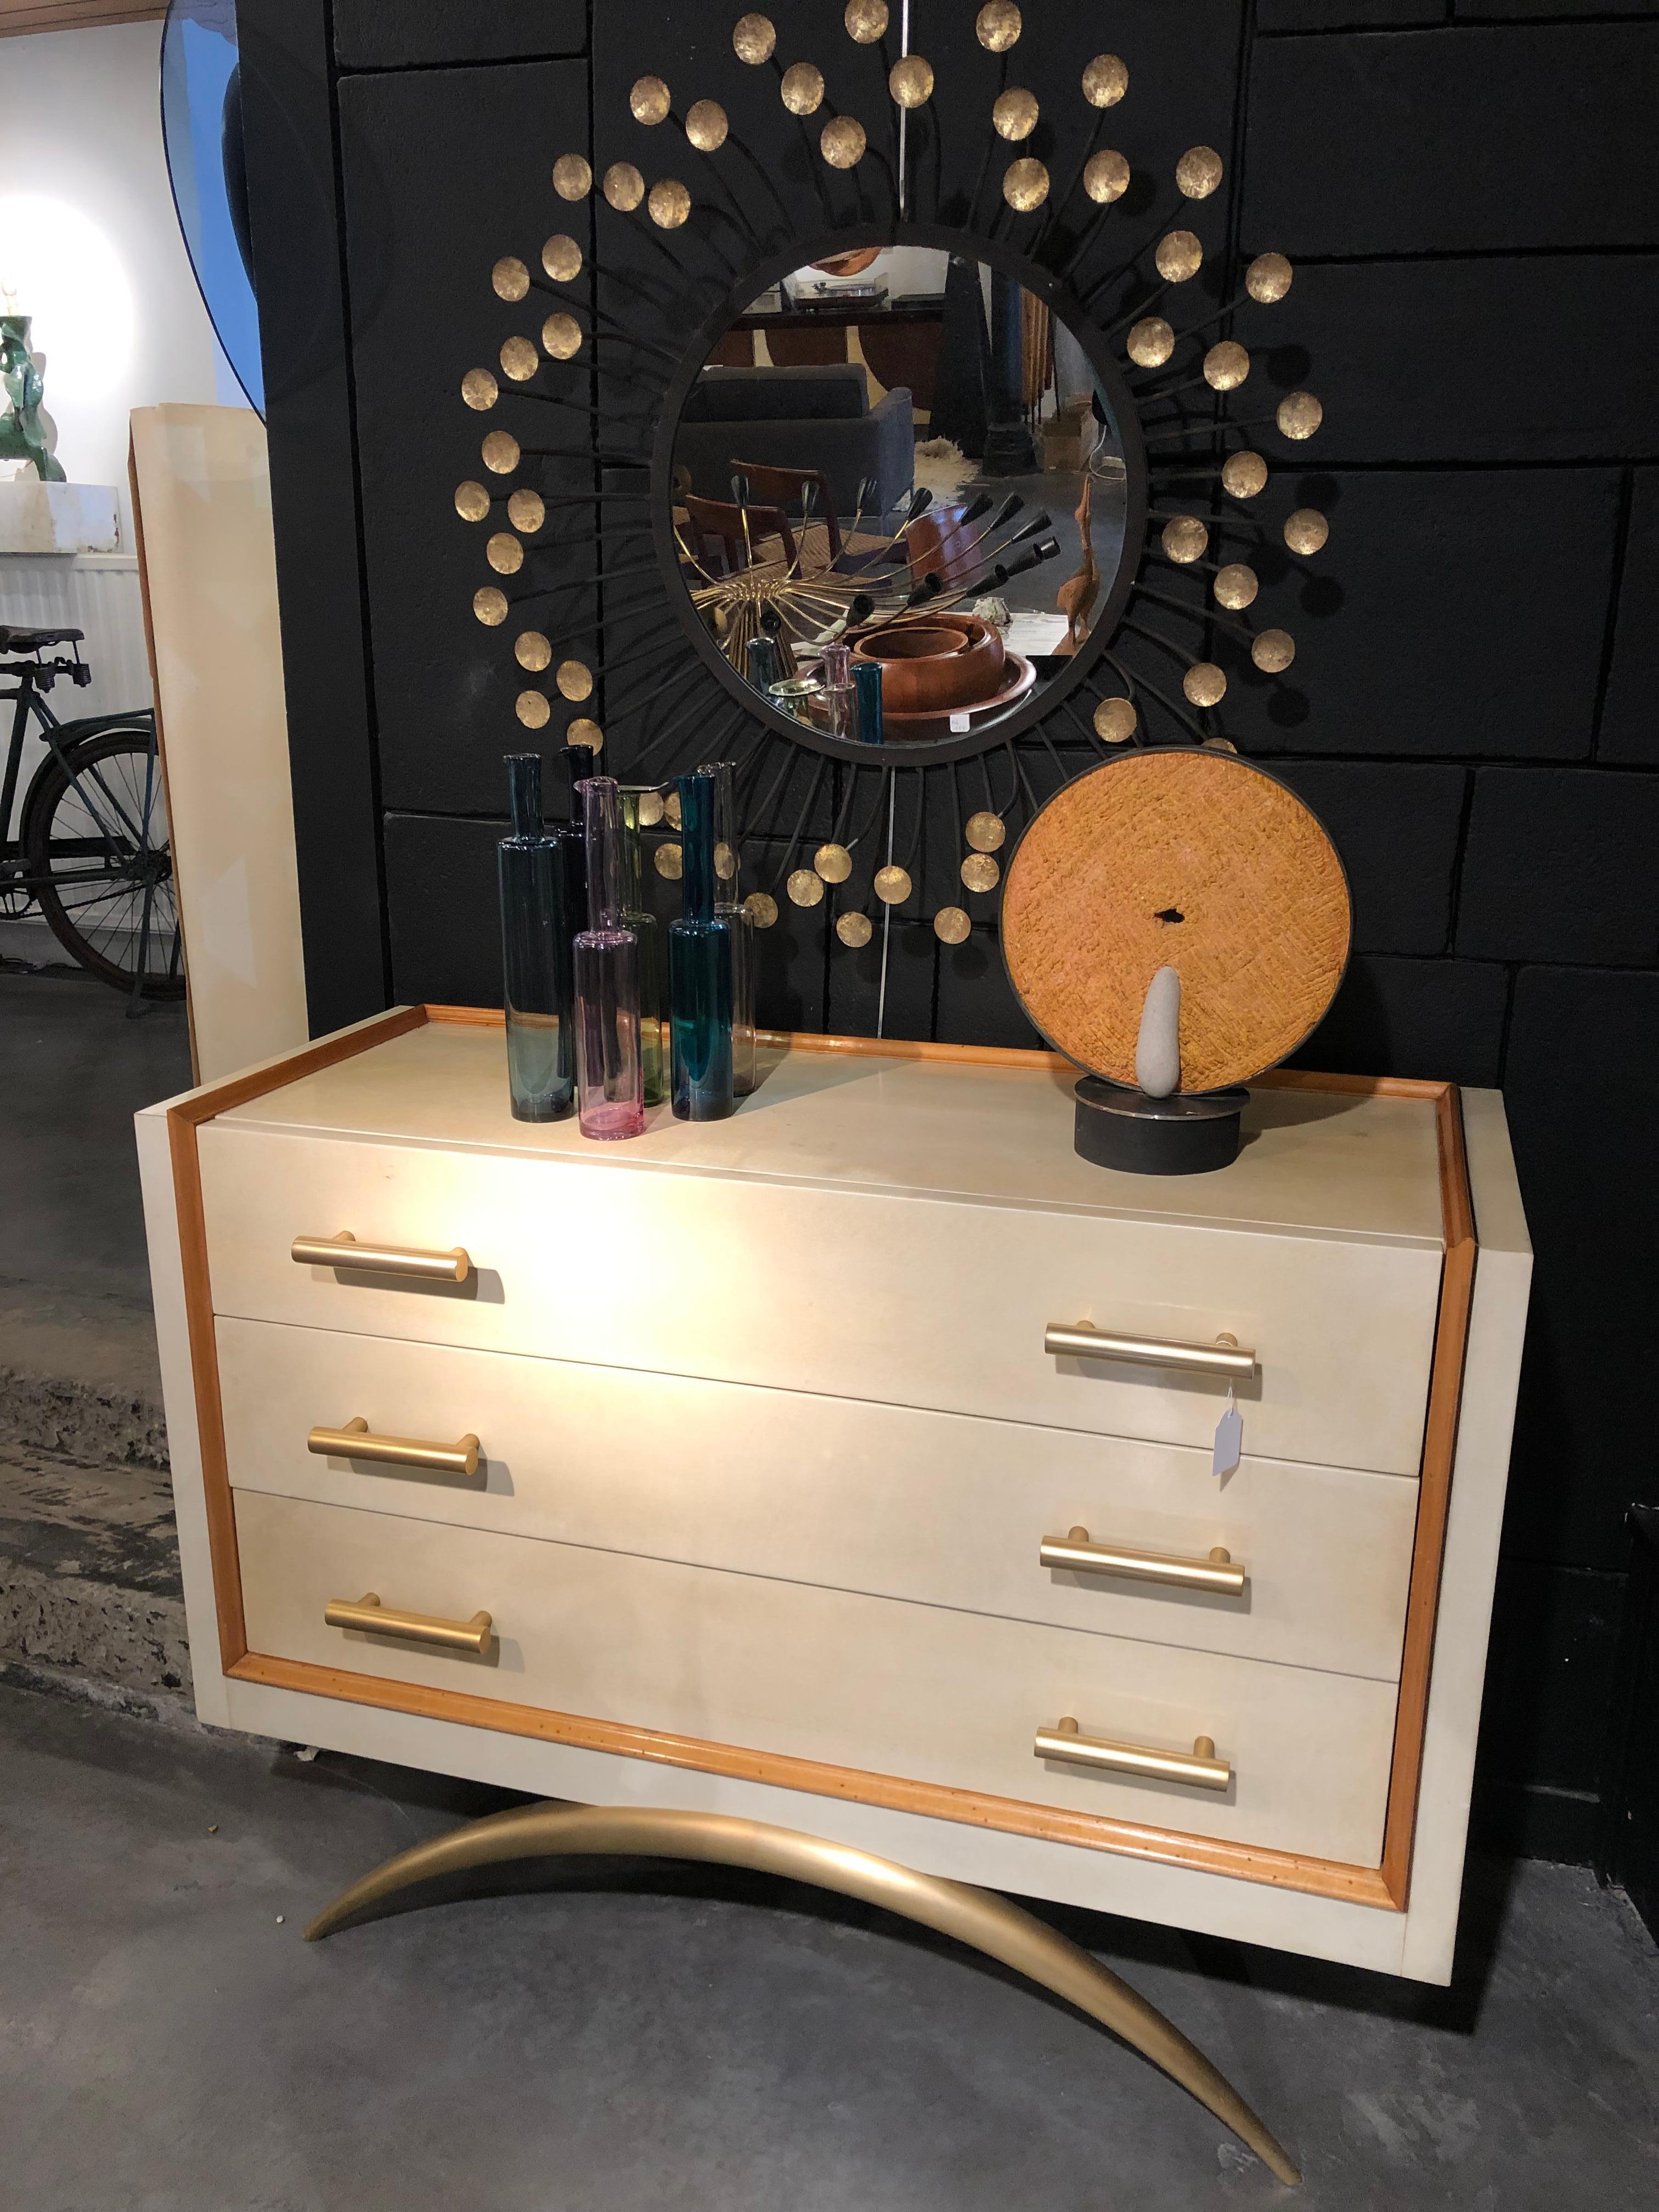 Beautiful and original chest of drawers made by Andre
Domin and Marcel Genevriere for Maison Dominique 
There is a stamp in the structure under the drawers 
The chest is made of solid wood with a parchment veneer
She’s standing on 2 arch in